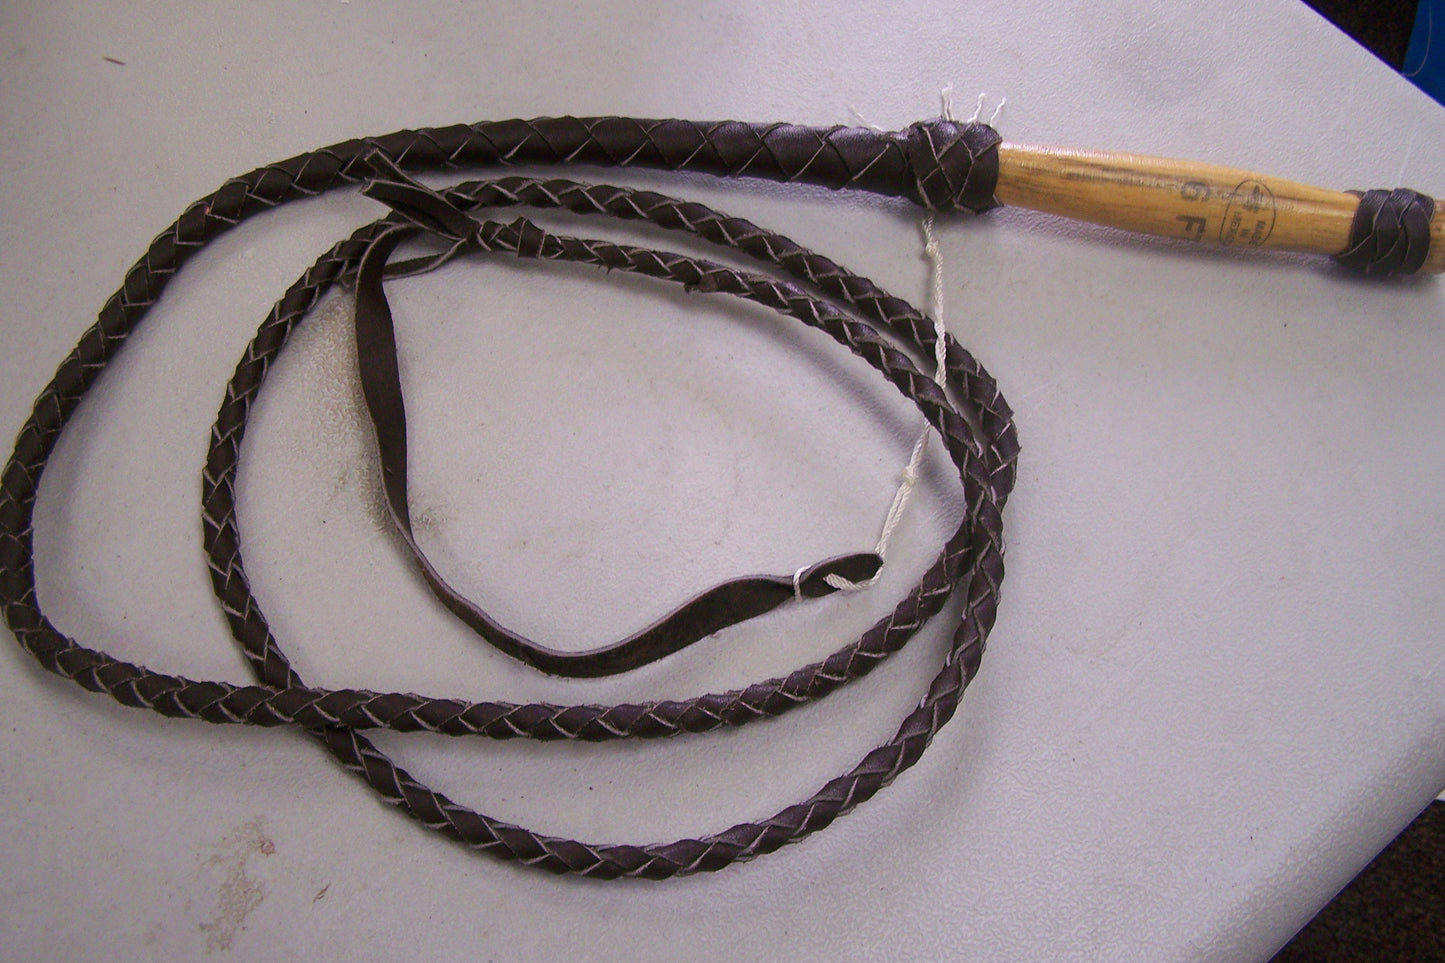 Indiana Jones Genuine Leather Handmade Bull Whip with Wooden Handle, 6'- Mexico